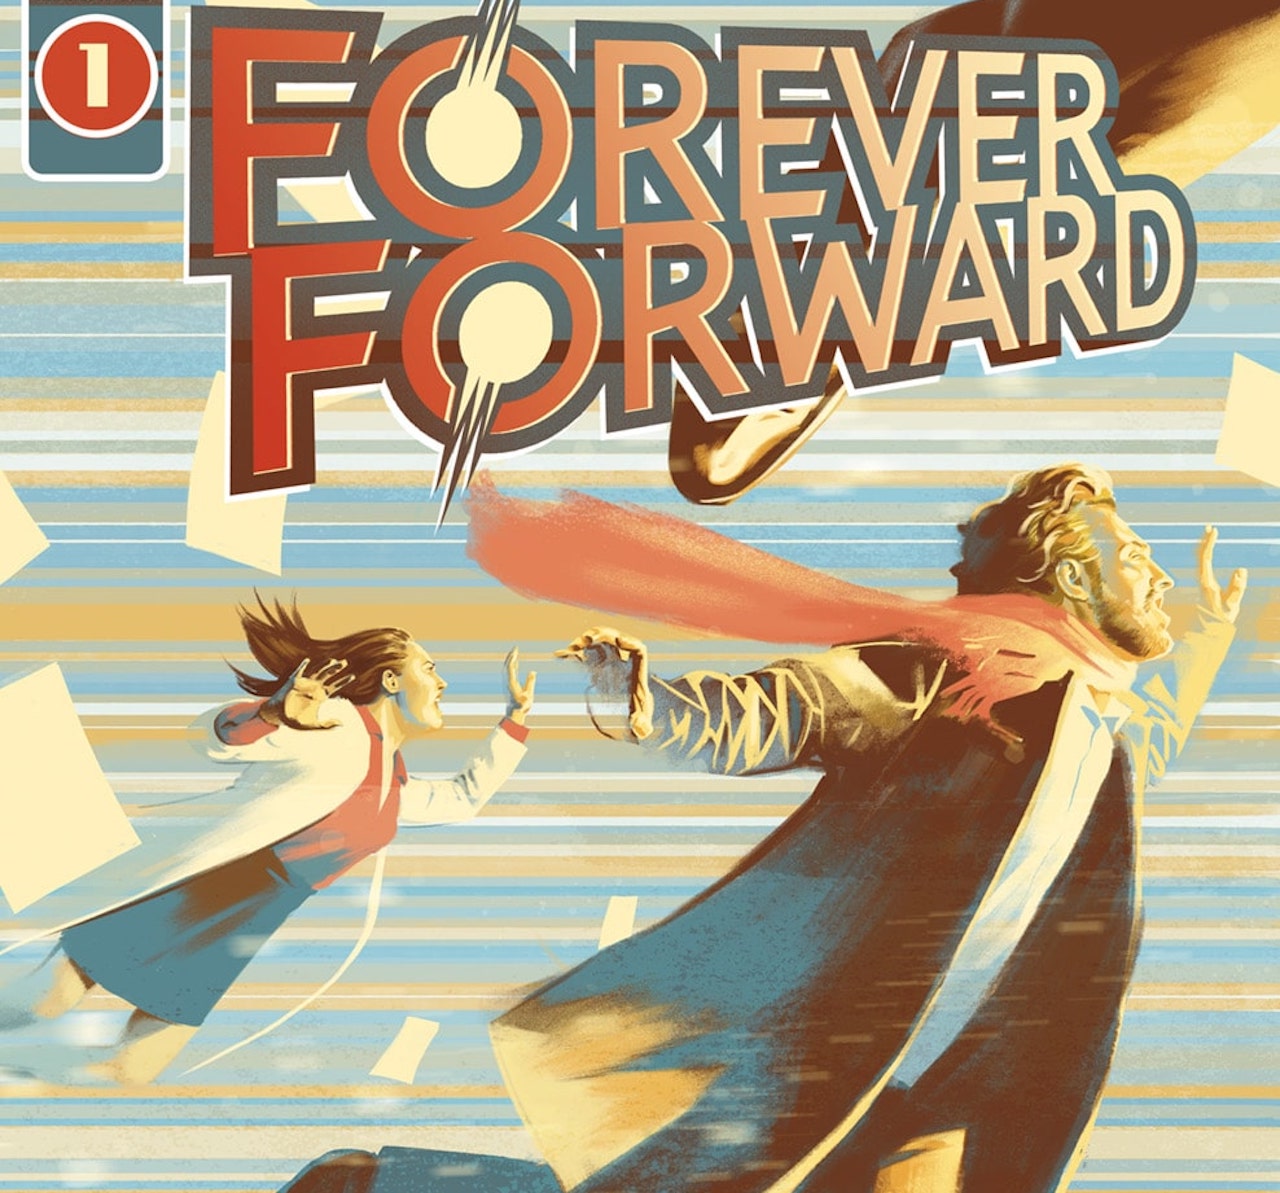 Scout Comics First Look: Forever Forward #1